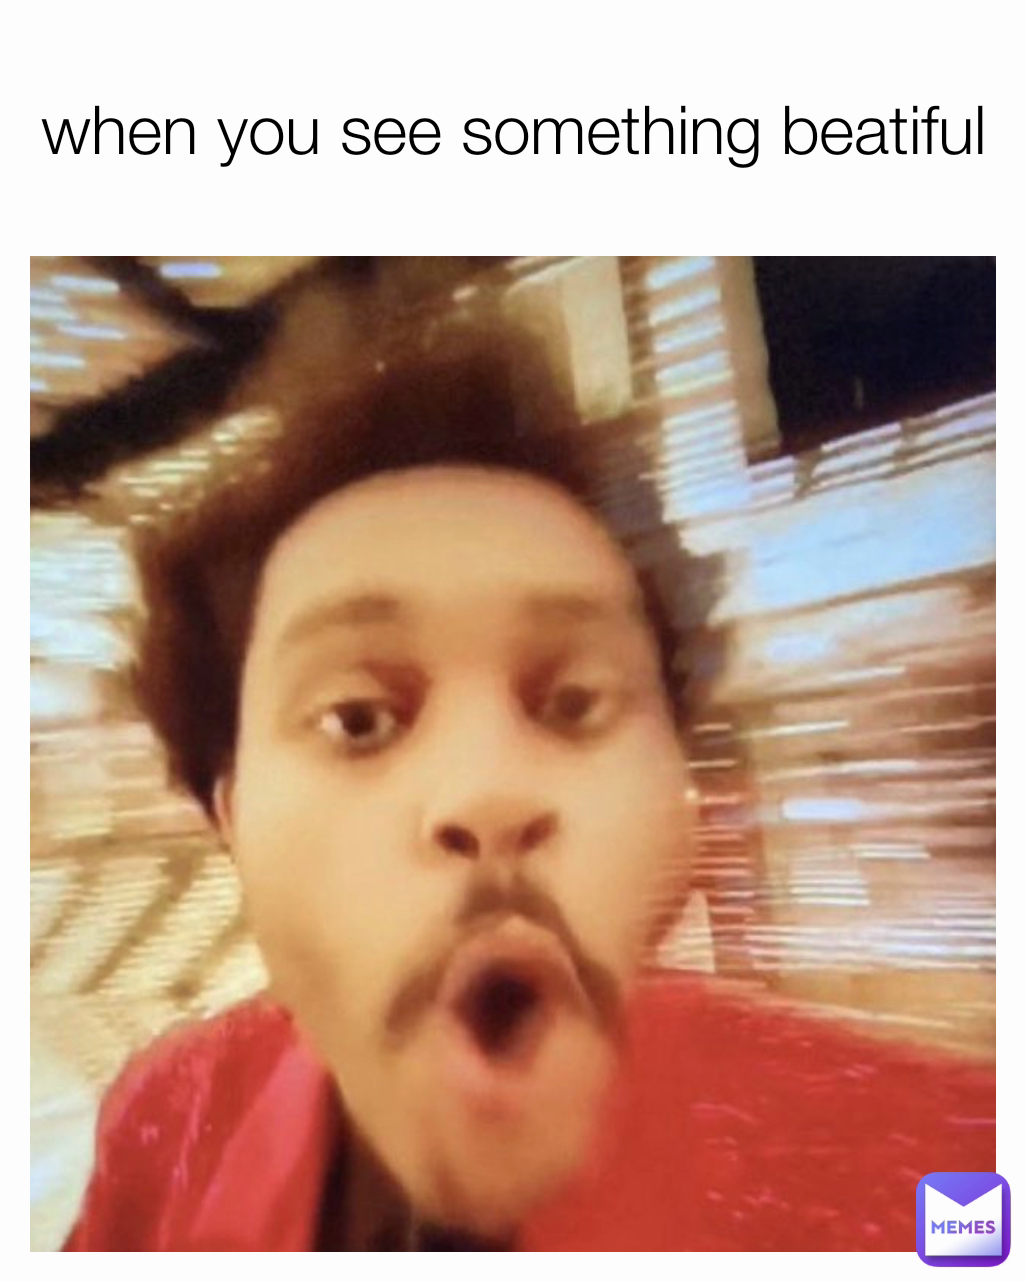 when you see something beatiful